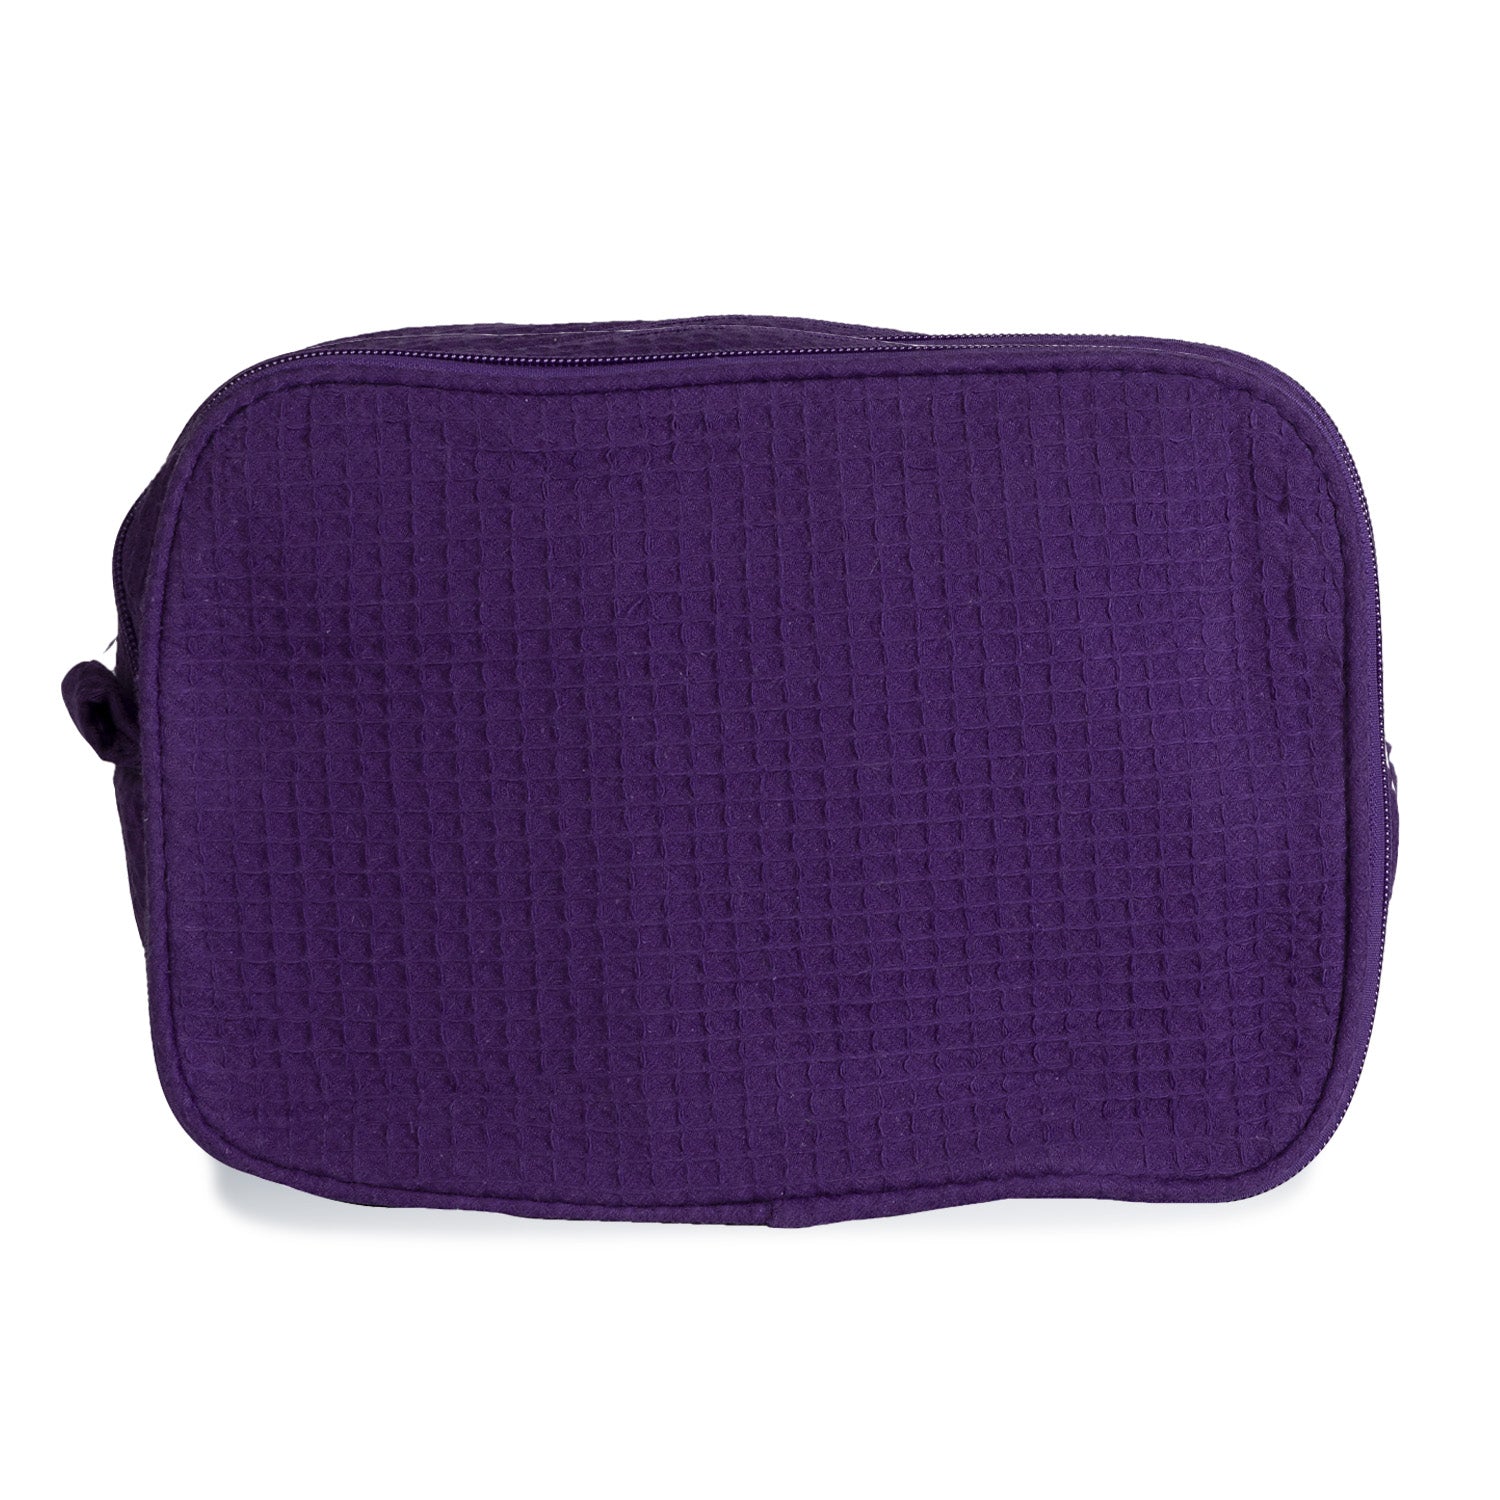 Waffle Weave Makeup Bag - Happy Thoughts Gifts